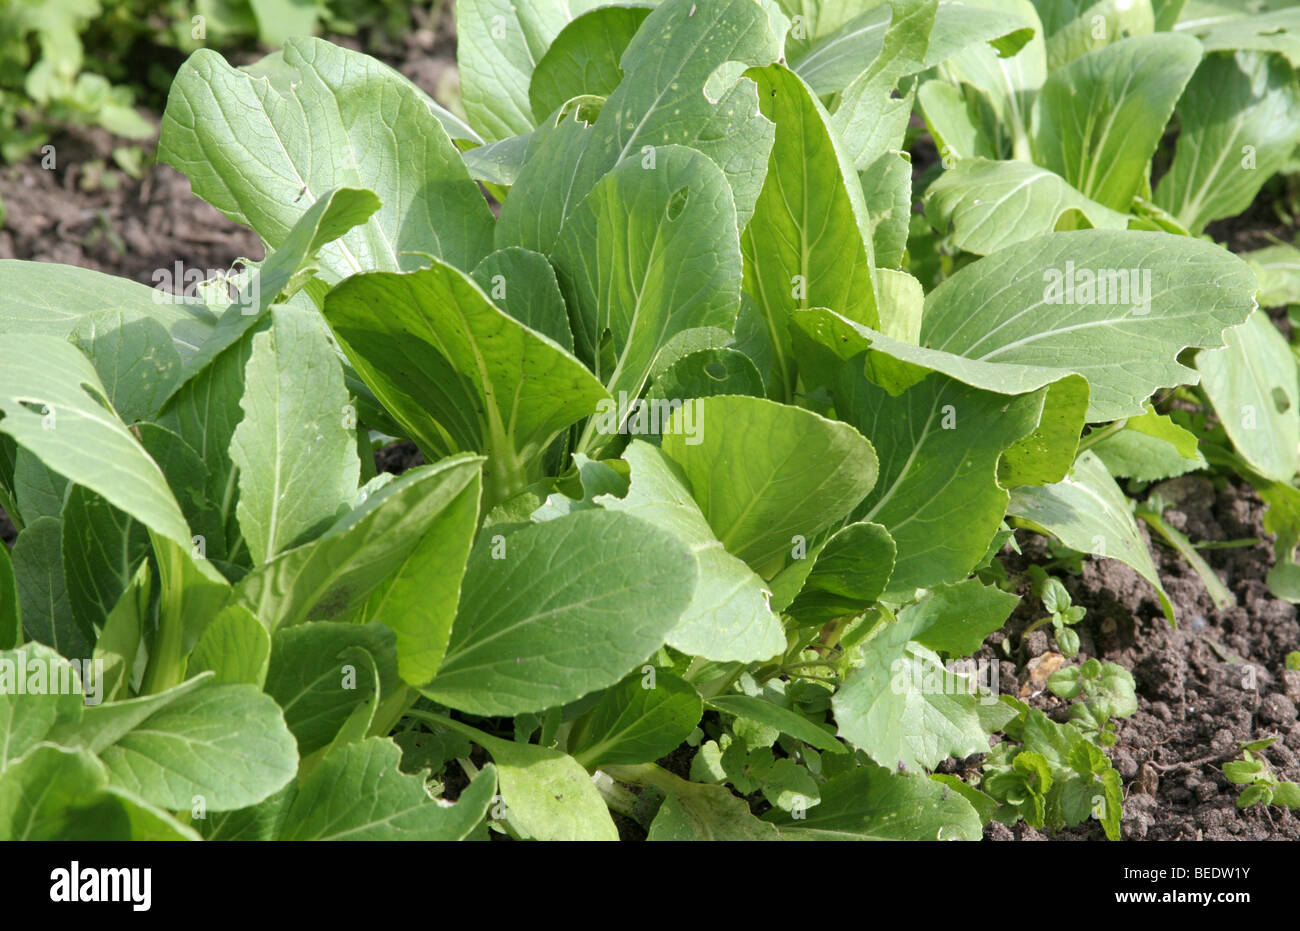 A row of Pak Choi (Bok Choi) Chinese cabbage Stock Photo